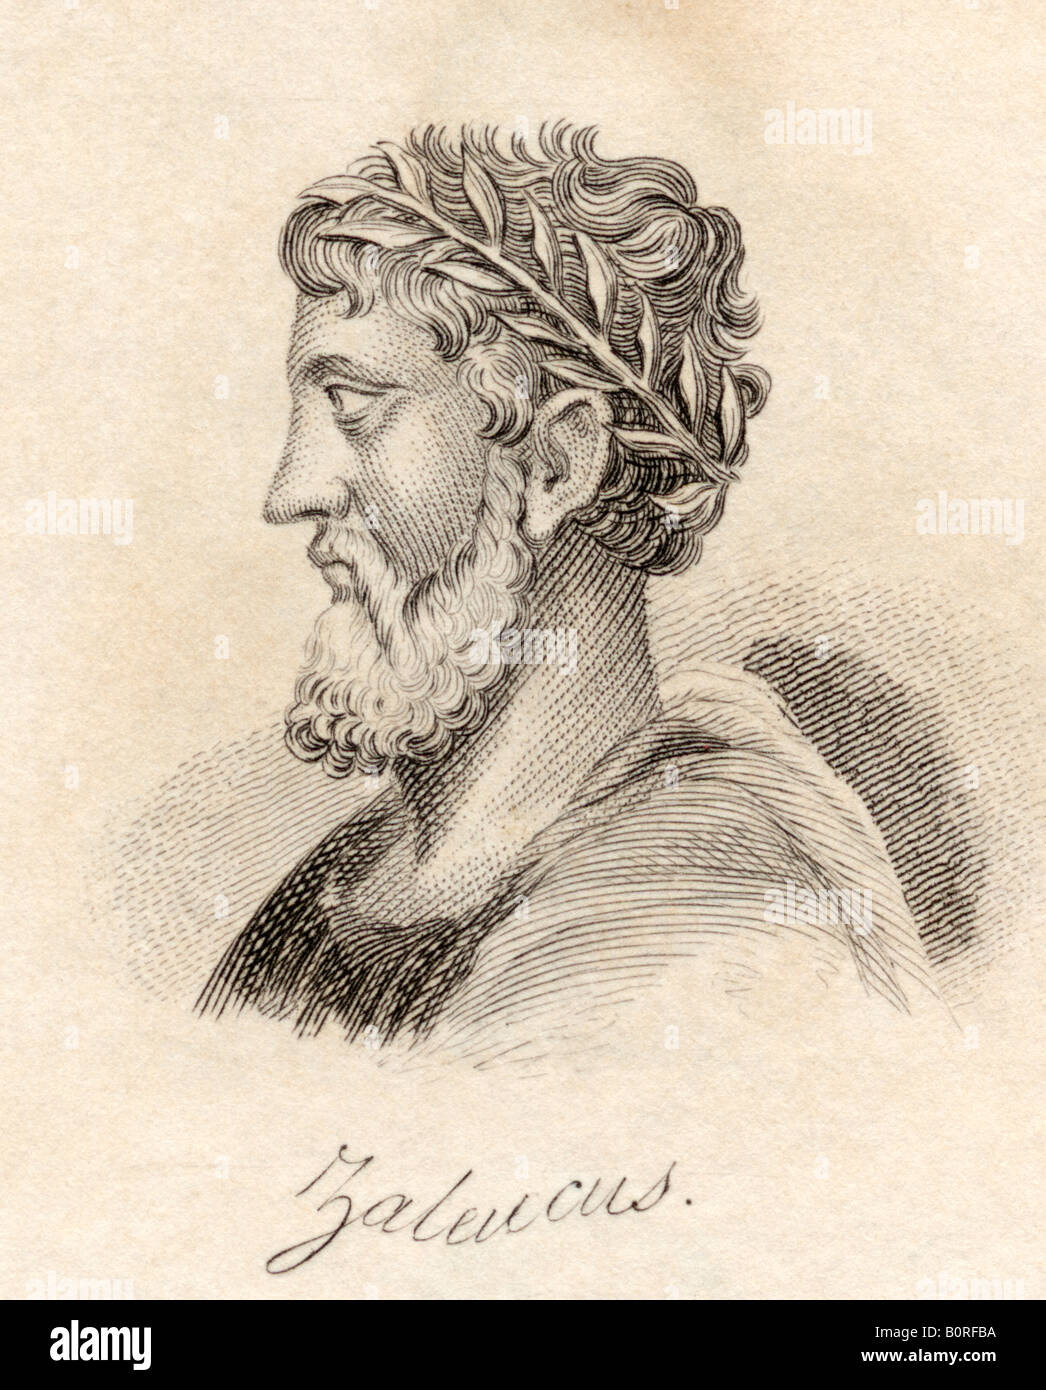 Zaleucus, 7th century BC. Greek lawgiver of Epizephyrian Locri in Italy, and Pythagorean philosopher. Deviser of first written Greek law code Locrian. Stock Photo